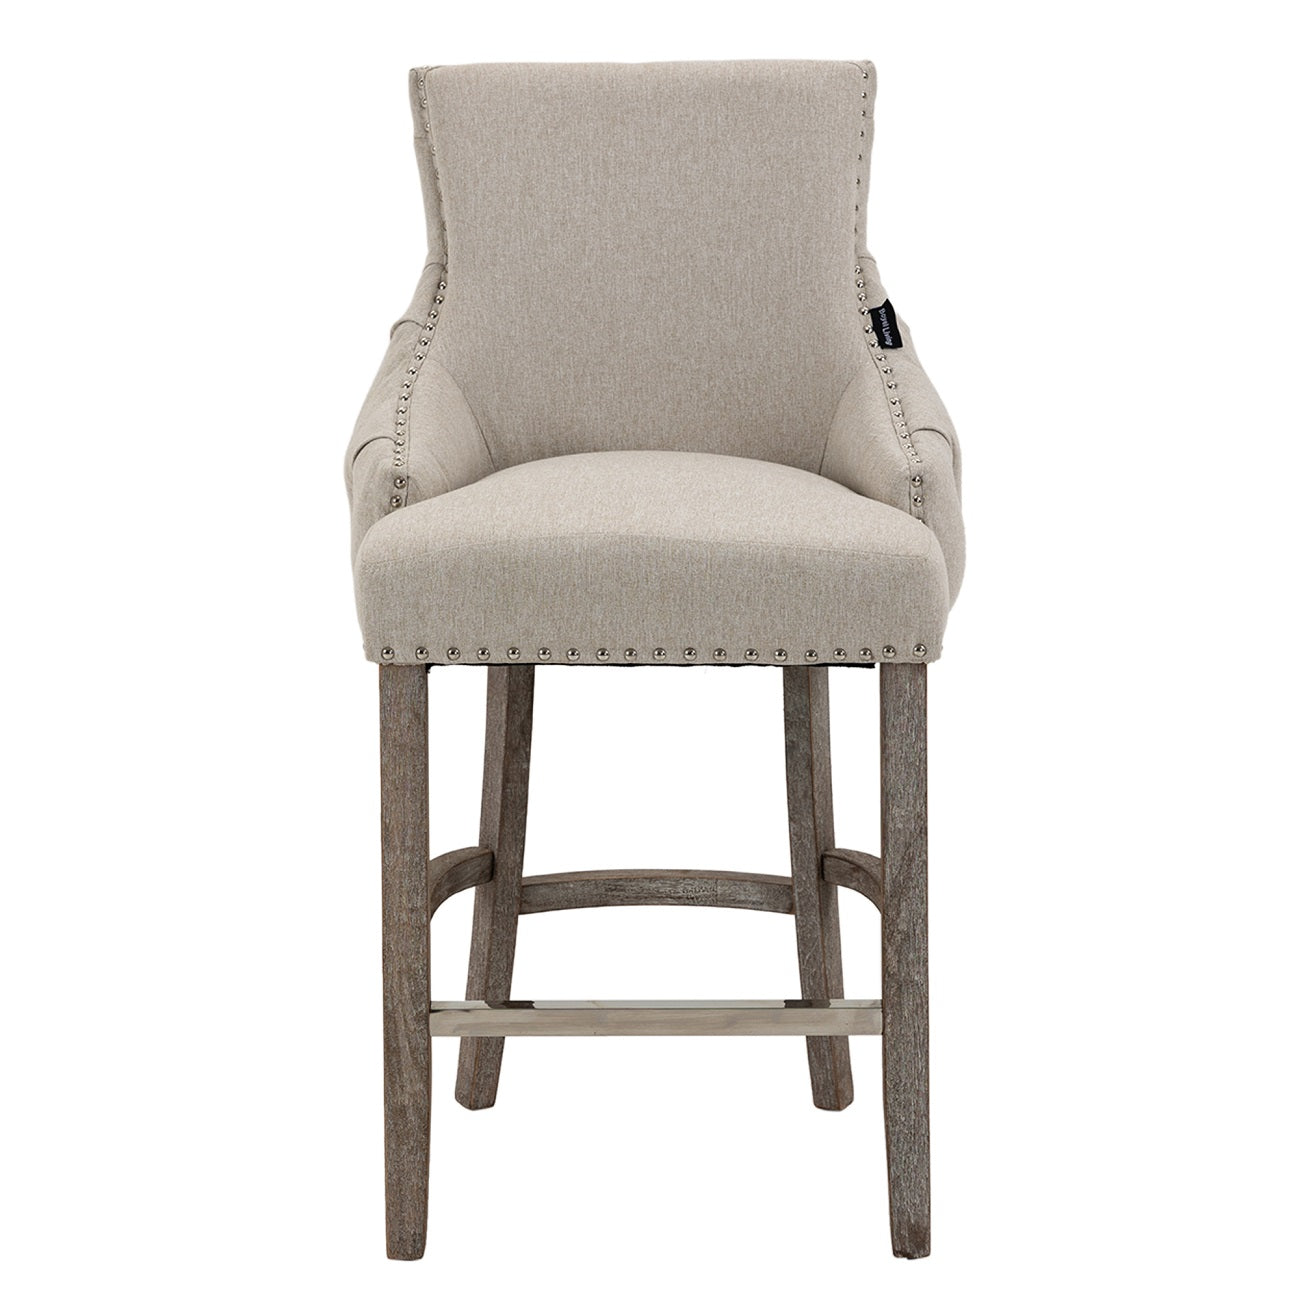 40 in. White Linen Fabric Nailhead Tufted Bar Stool with 4 Solid Wood Legs, Set of 2-Boyel Living